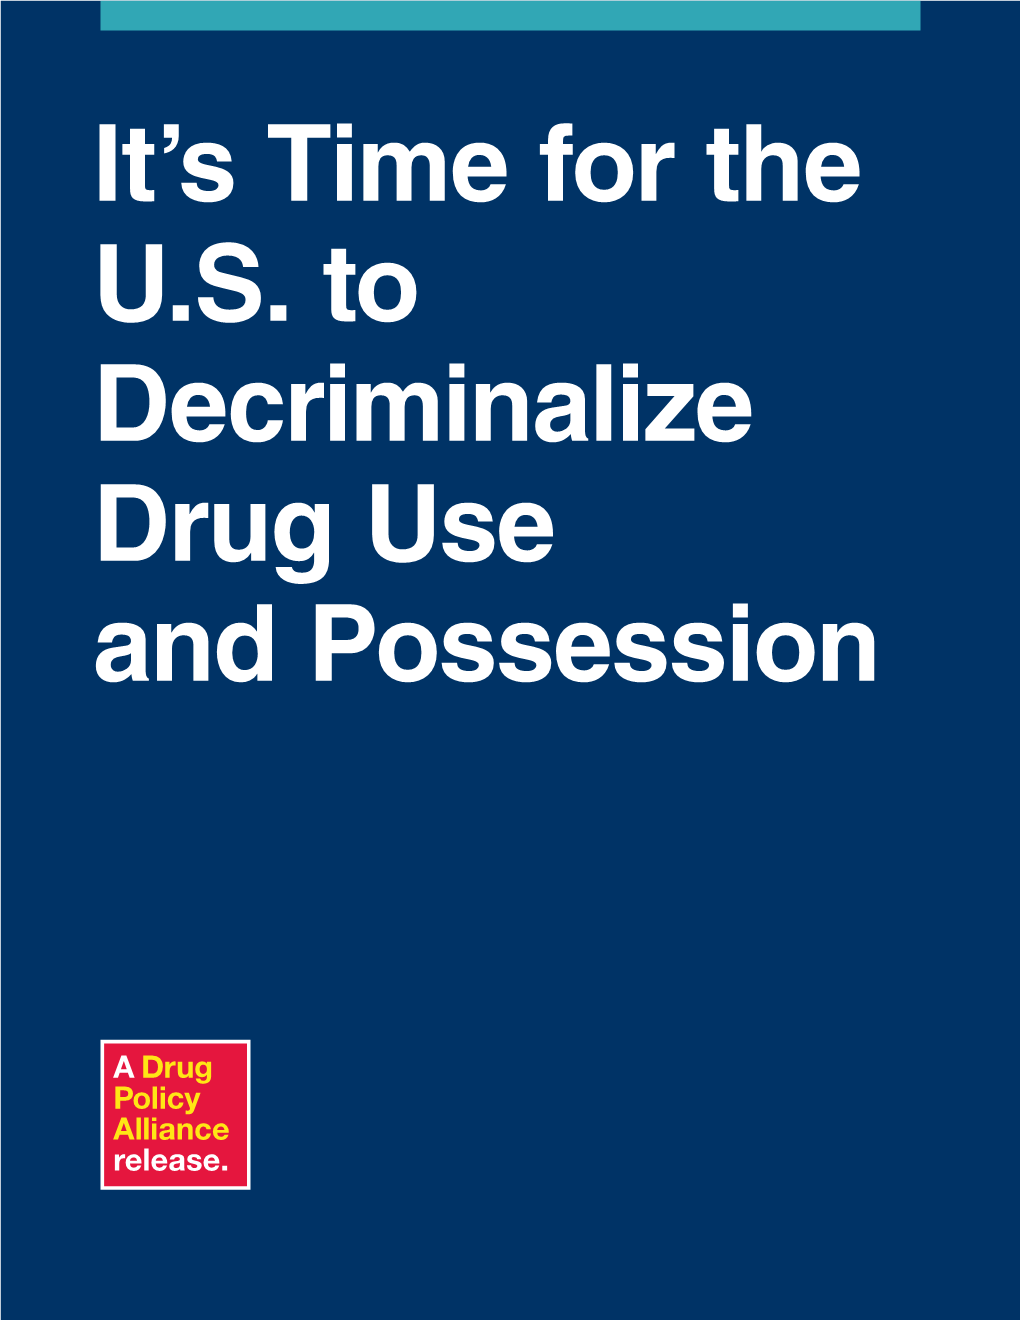 It's Time for the U.S. to Decriminalize Drug Use and Possession